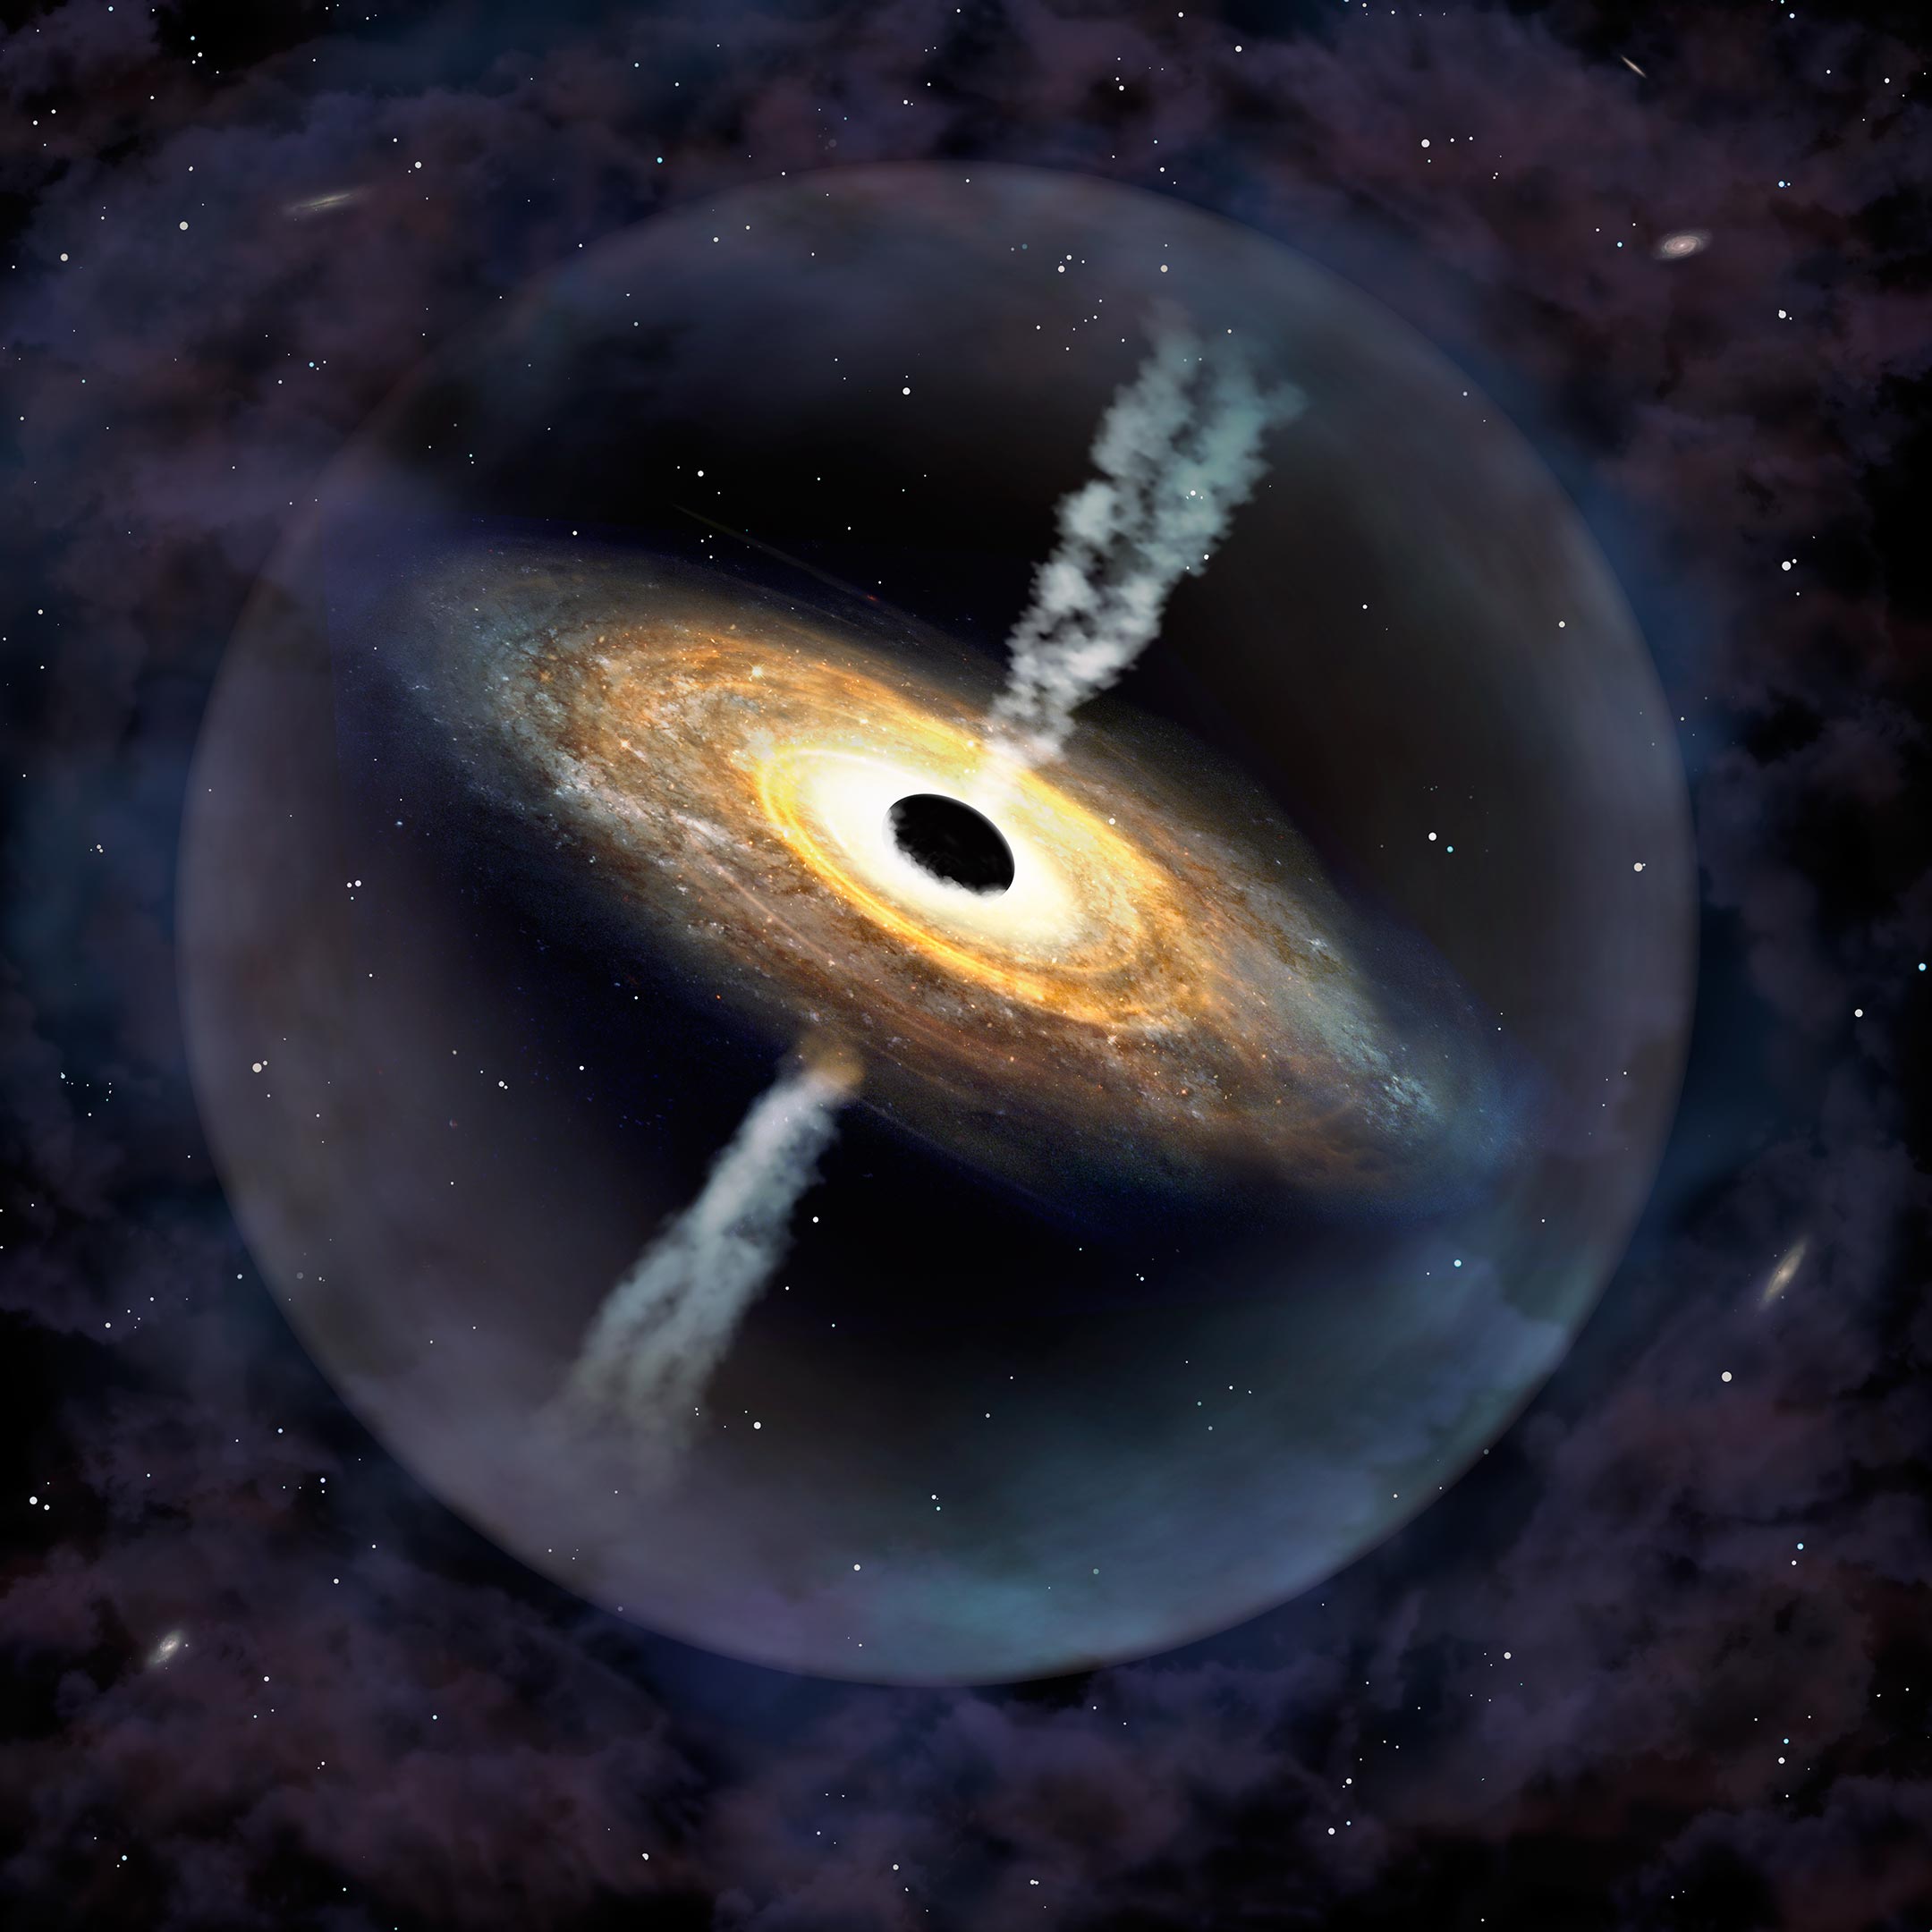 Monster Billion Solar Mass Black Hole Found in the Early Universe